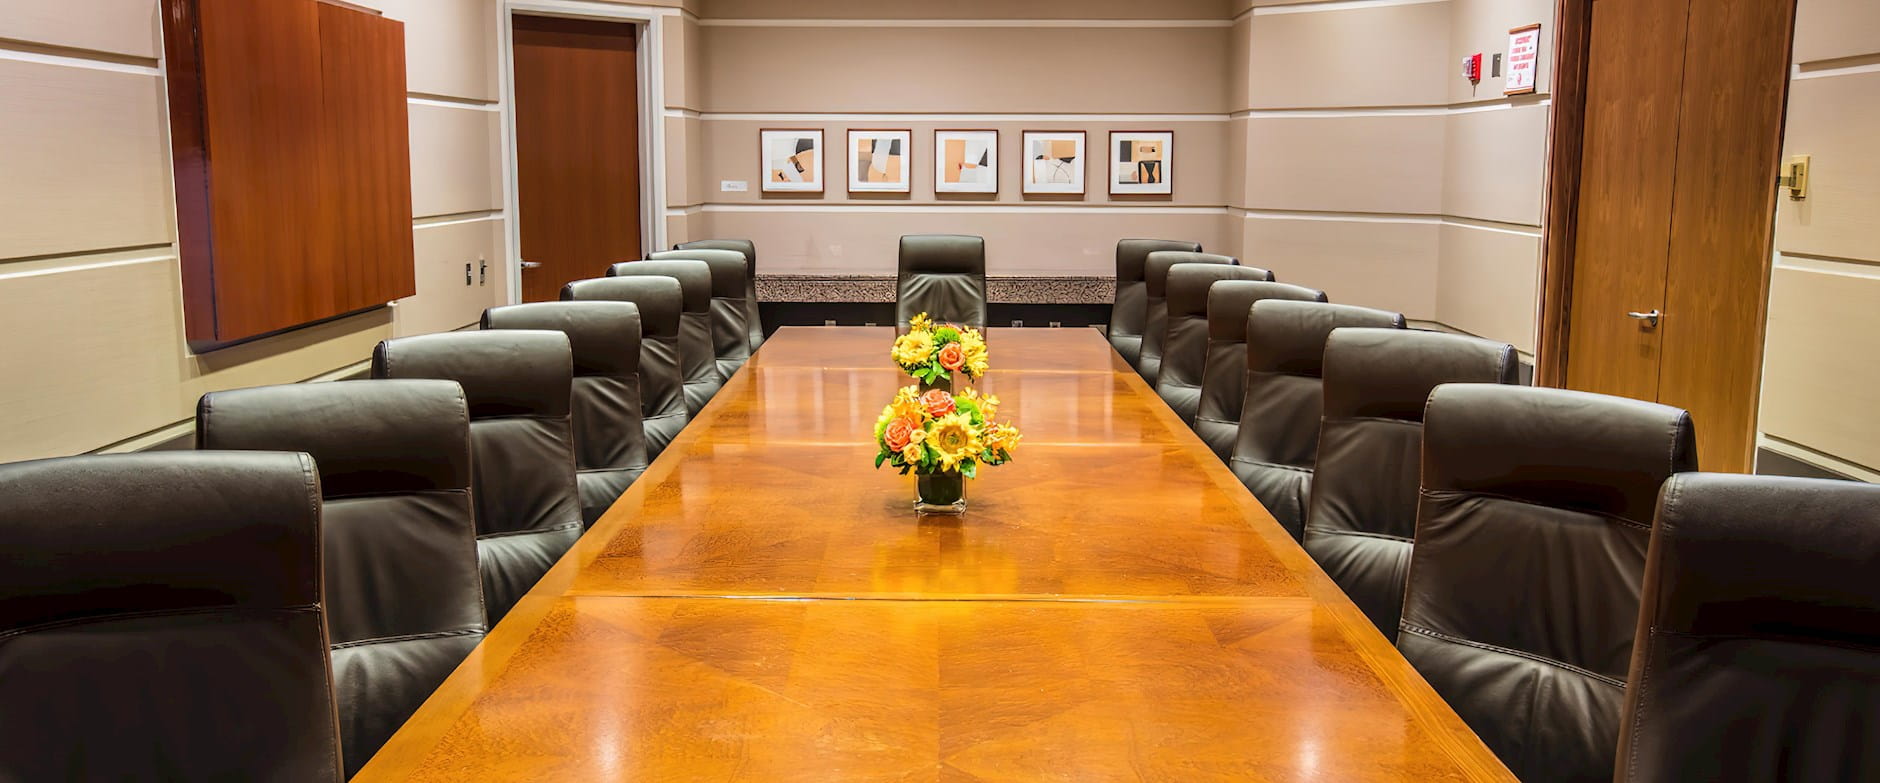 A large, warm wooden boardroom table in the Gleacher Center surrounded by leather office chairs; bouquets of flowers decorate the table